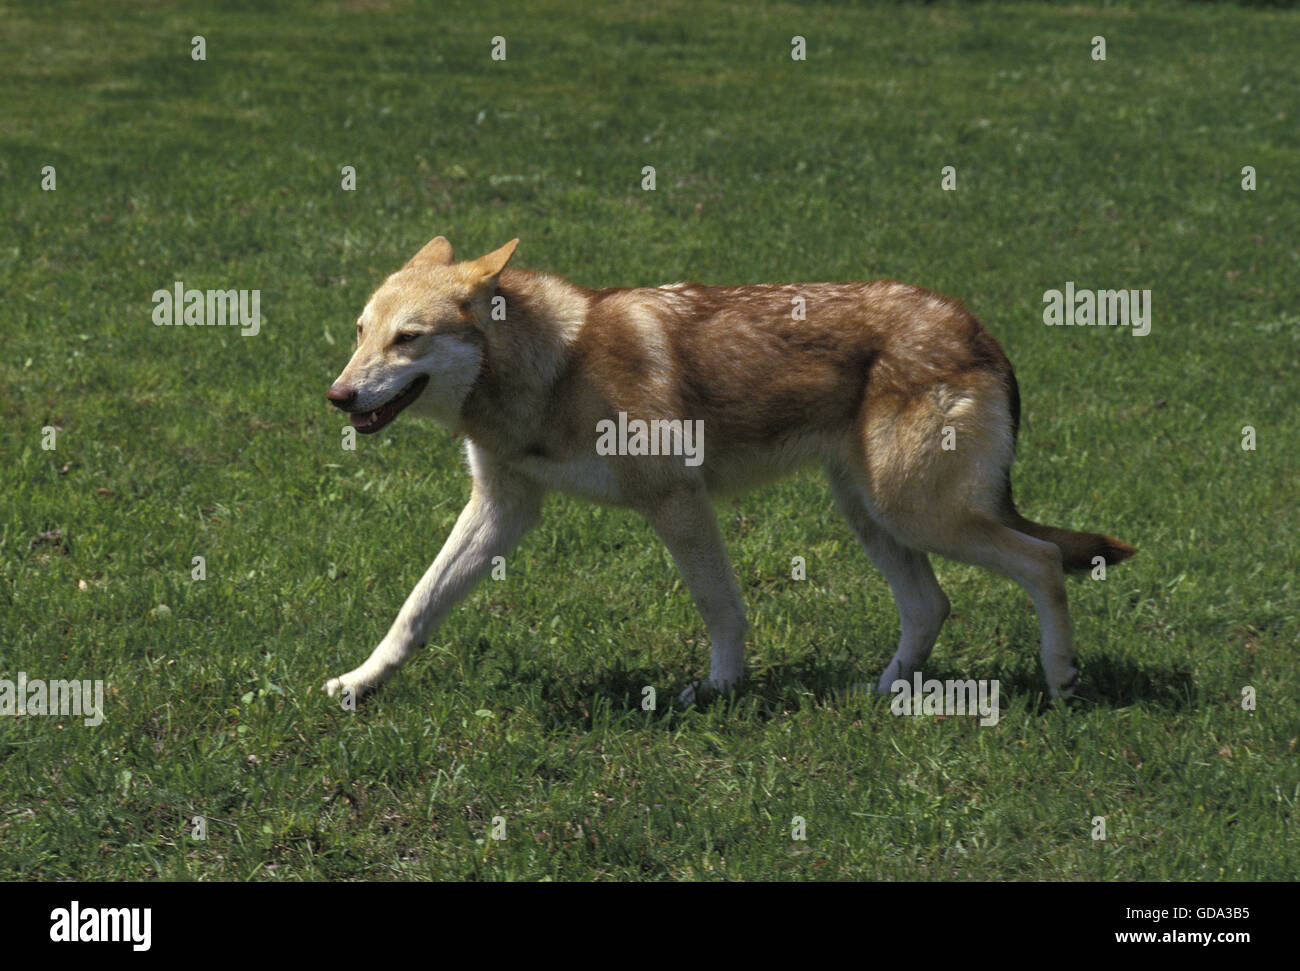 Saarloos Wolfhound, Dog Breed from Netherlands Stock Photo